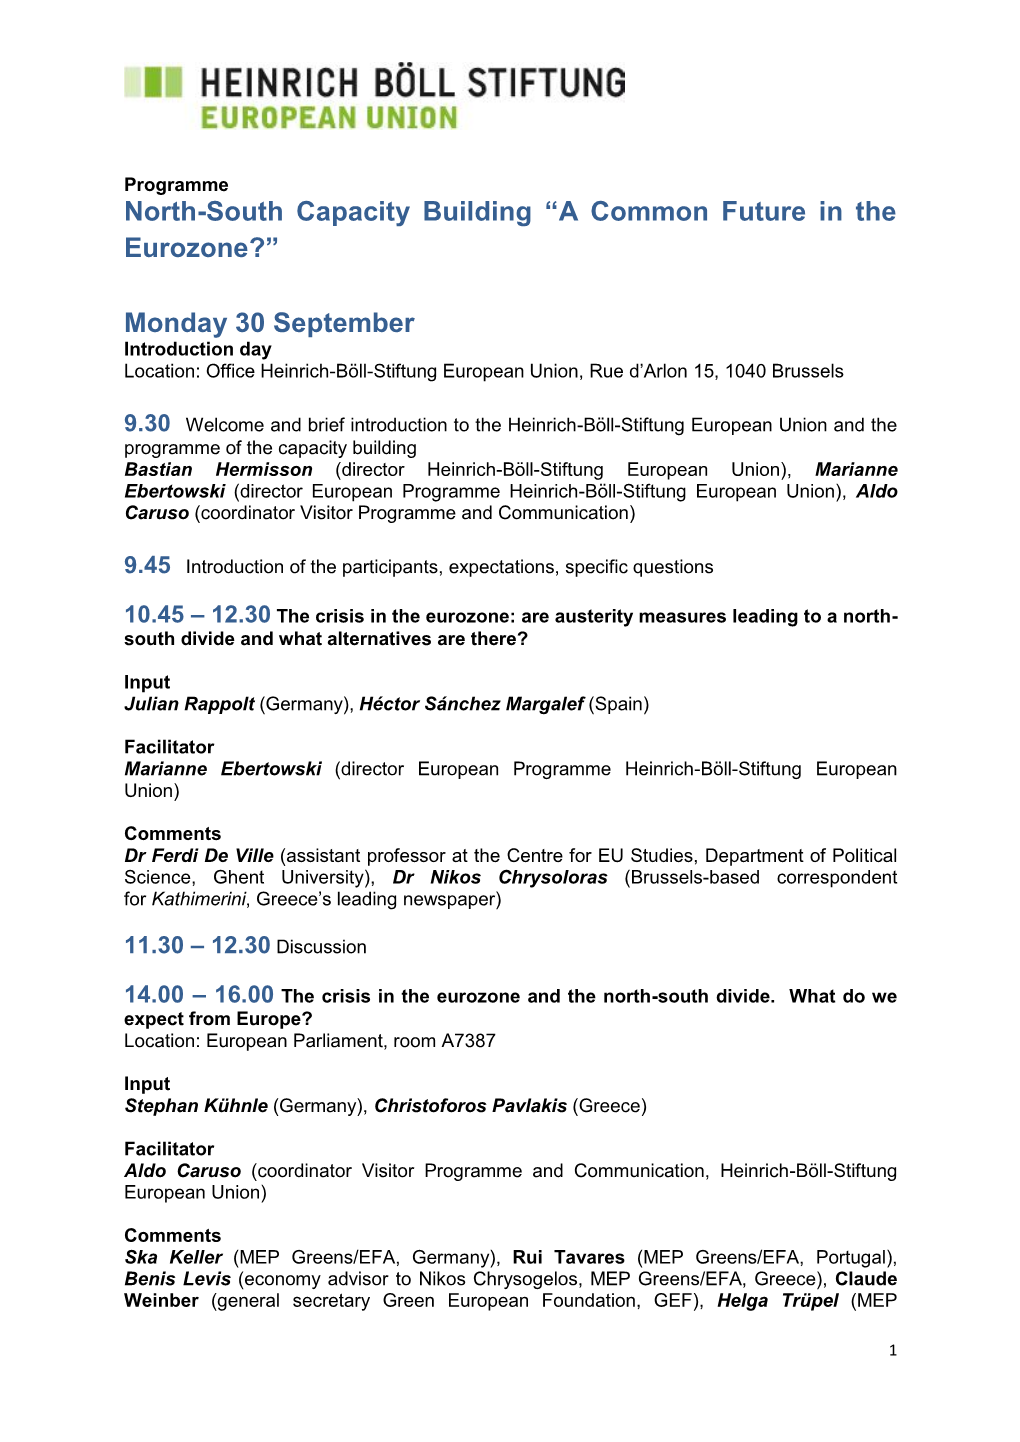 North-South Capacity Building “A Common Future in the Eurozone?”